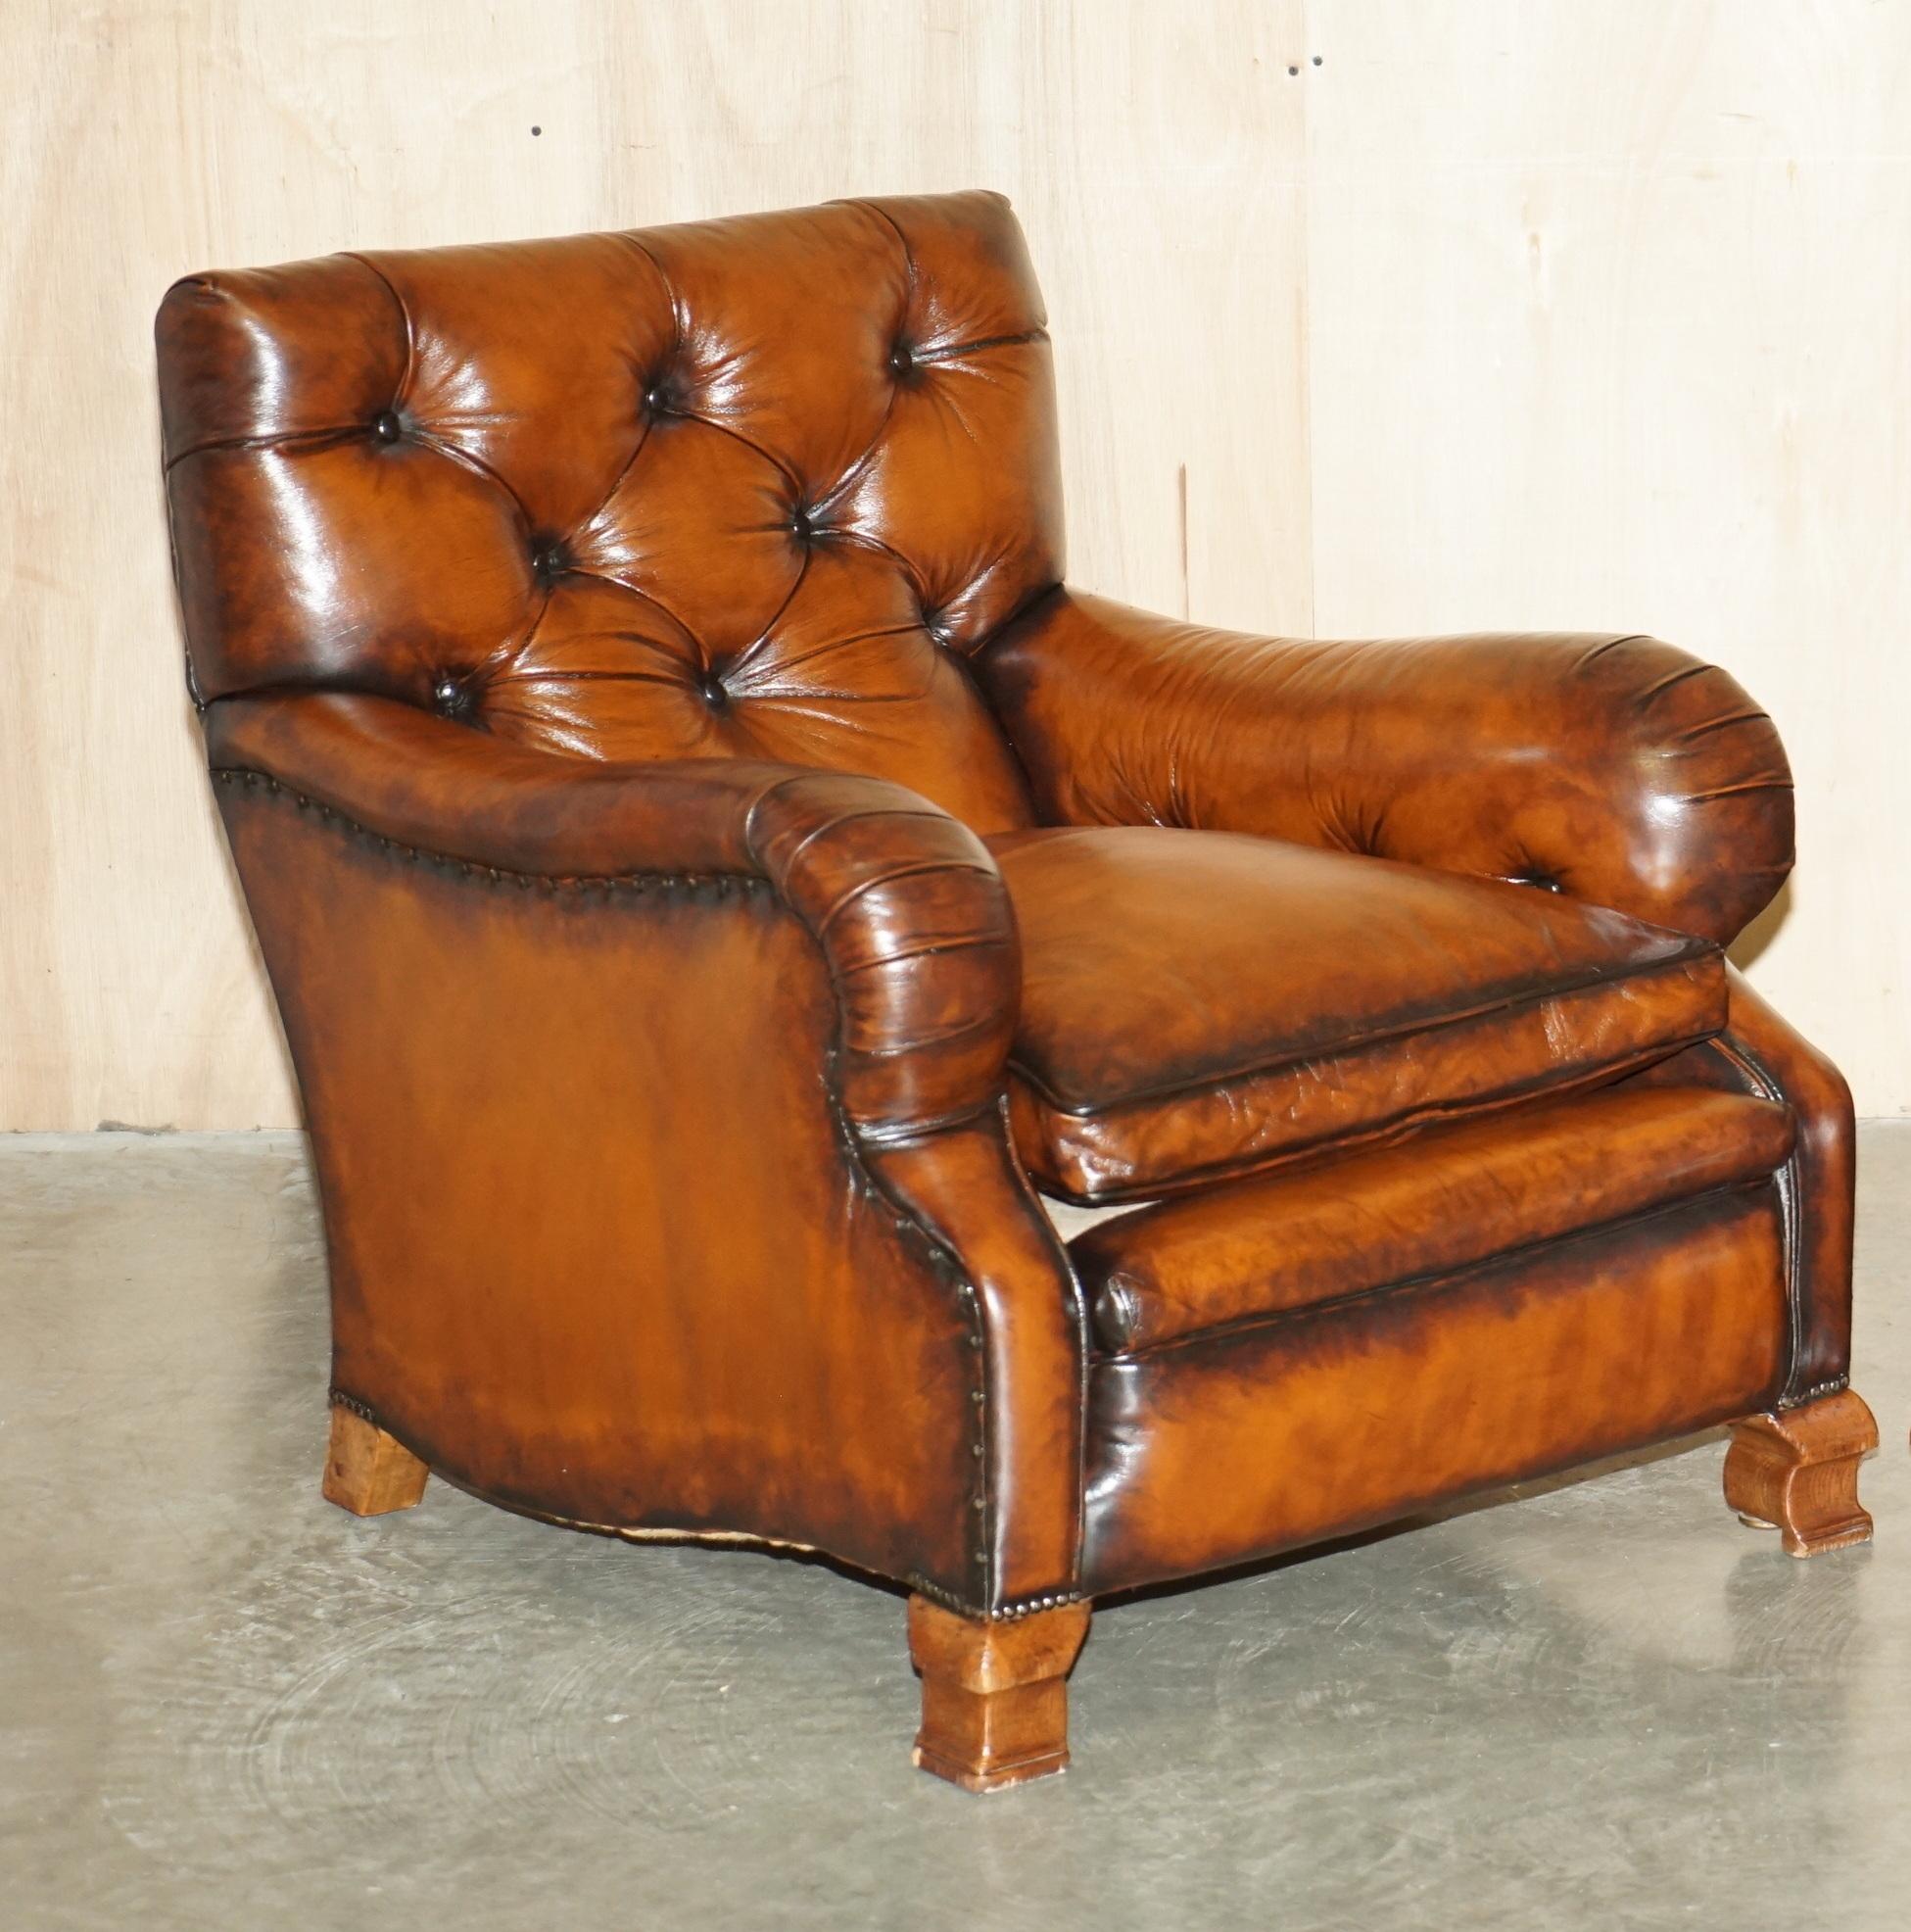 Royal House Antiques

Royal House Antiques is delighted to offer for sale this lovely pair of Victorian fully restored Chesterfield brown leather hand dyed armchairs made in the Howard & Son's style with curved drop arms

Please note the delivery